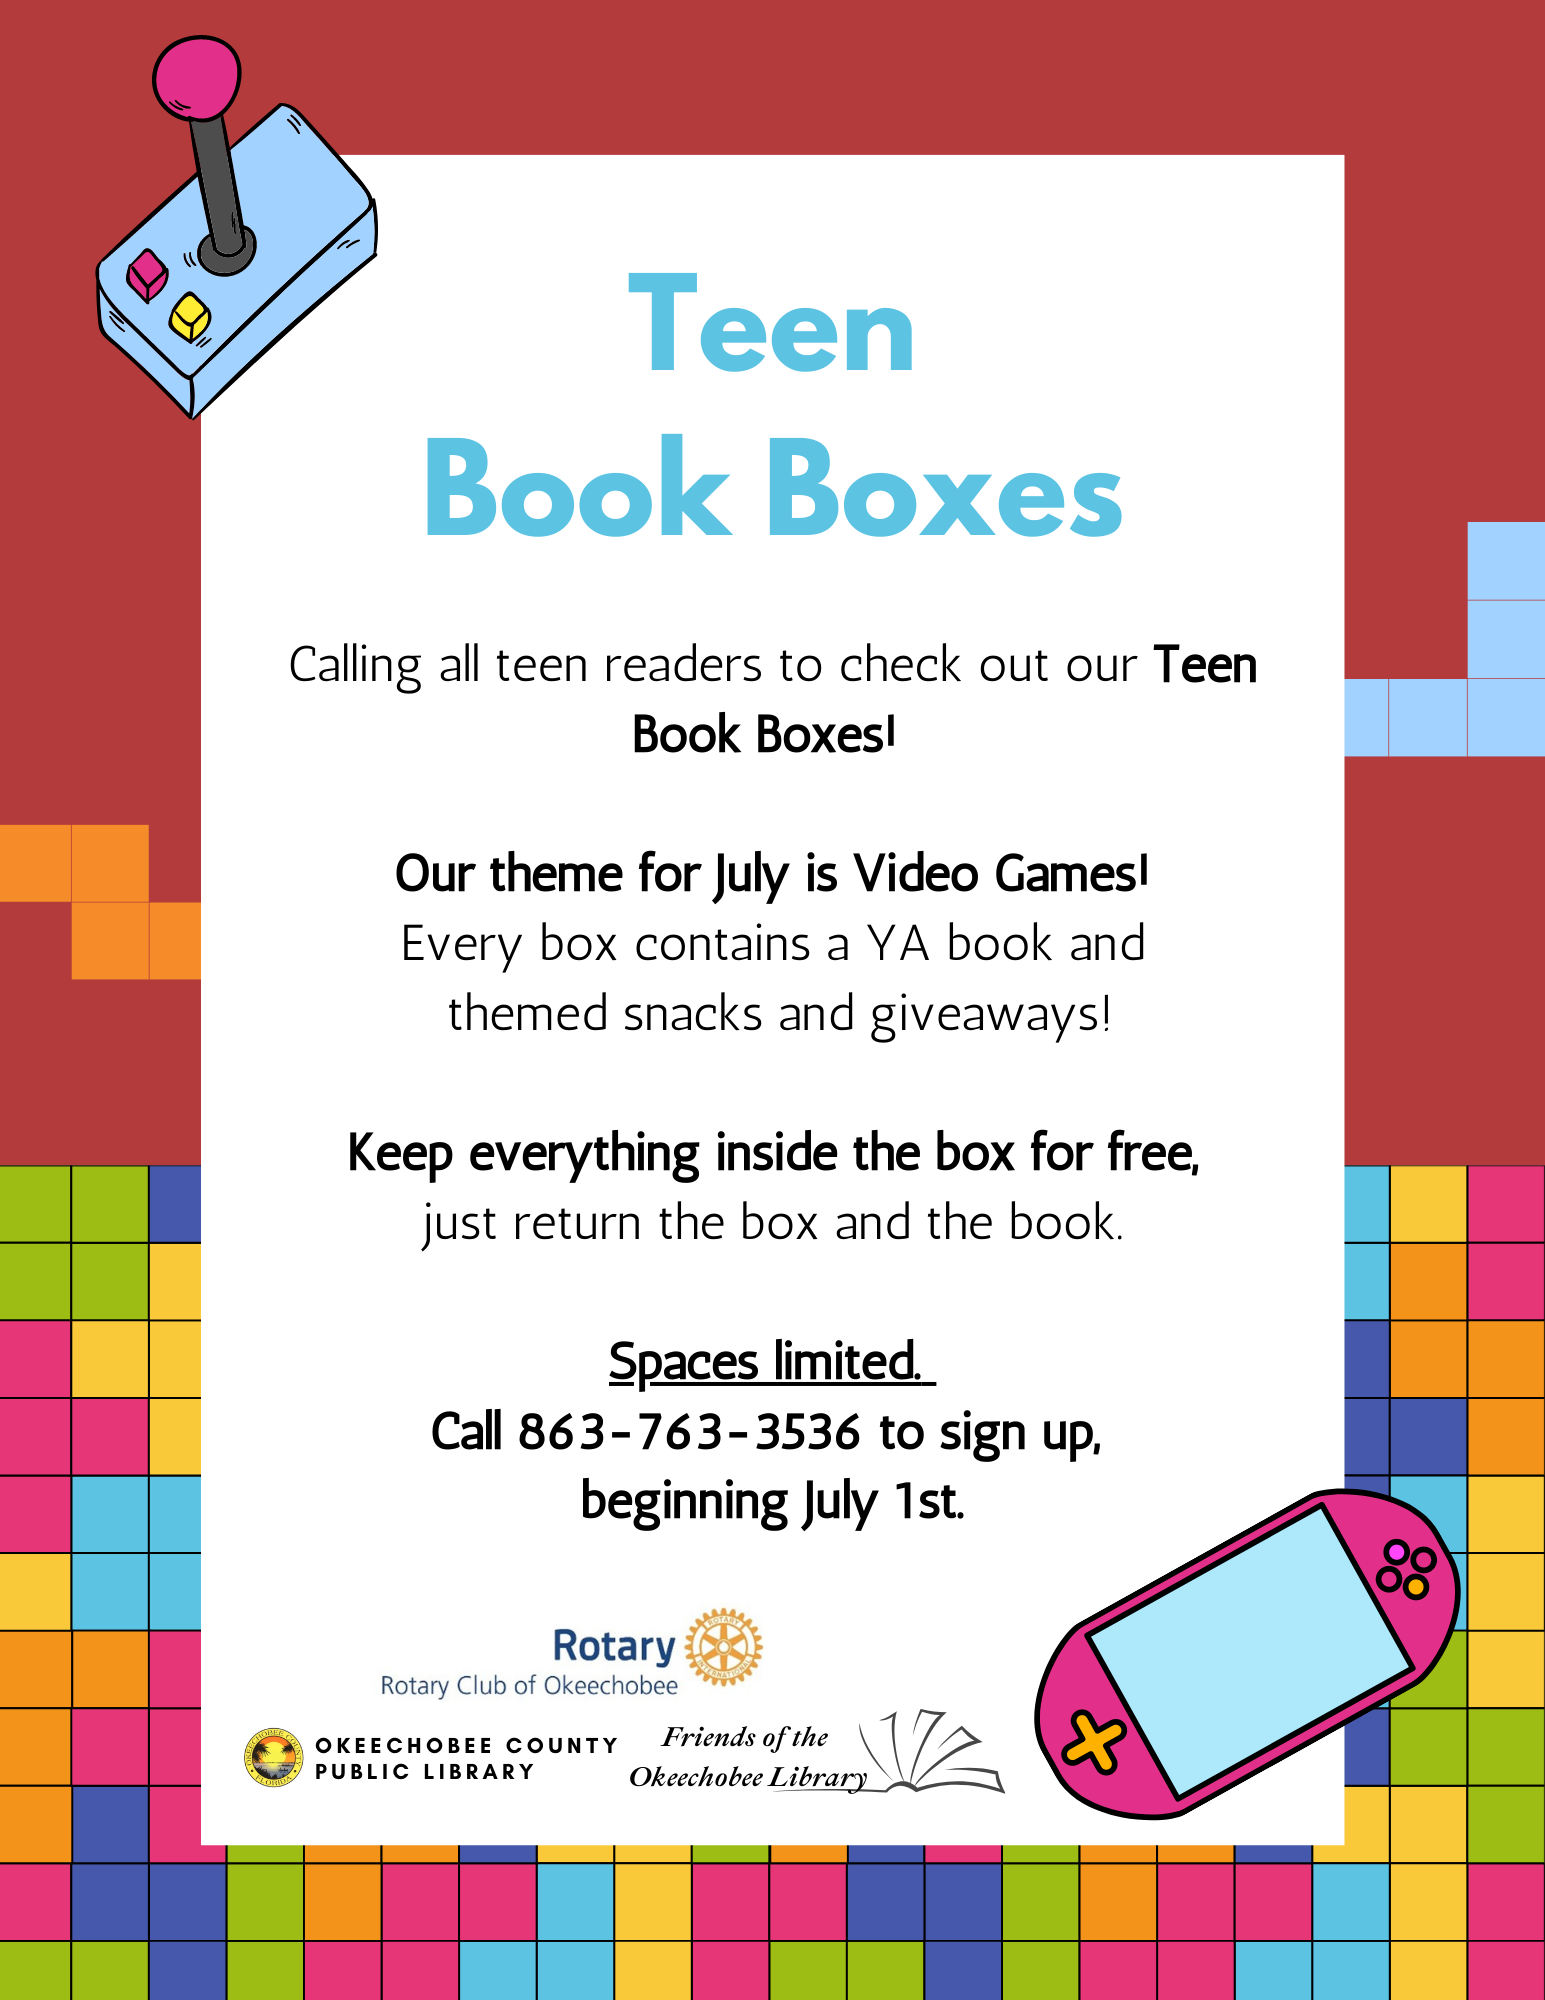 July's theme is Video Games! Every box will contain a curated book choice and themed giveaways which can range from bookmarks to fun keychains to everything in between! Sign up to see what fun surprise you find!SPACES LIMITED. To sign up call 863-763-3536, beginning July 1st!